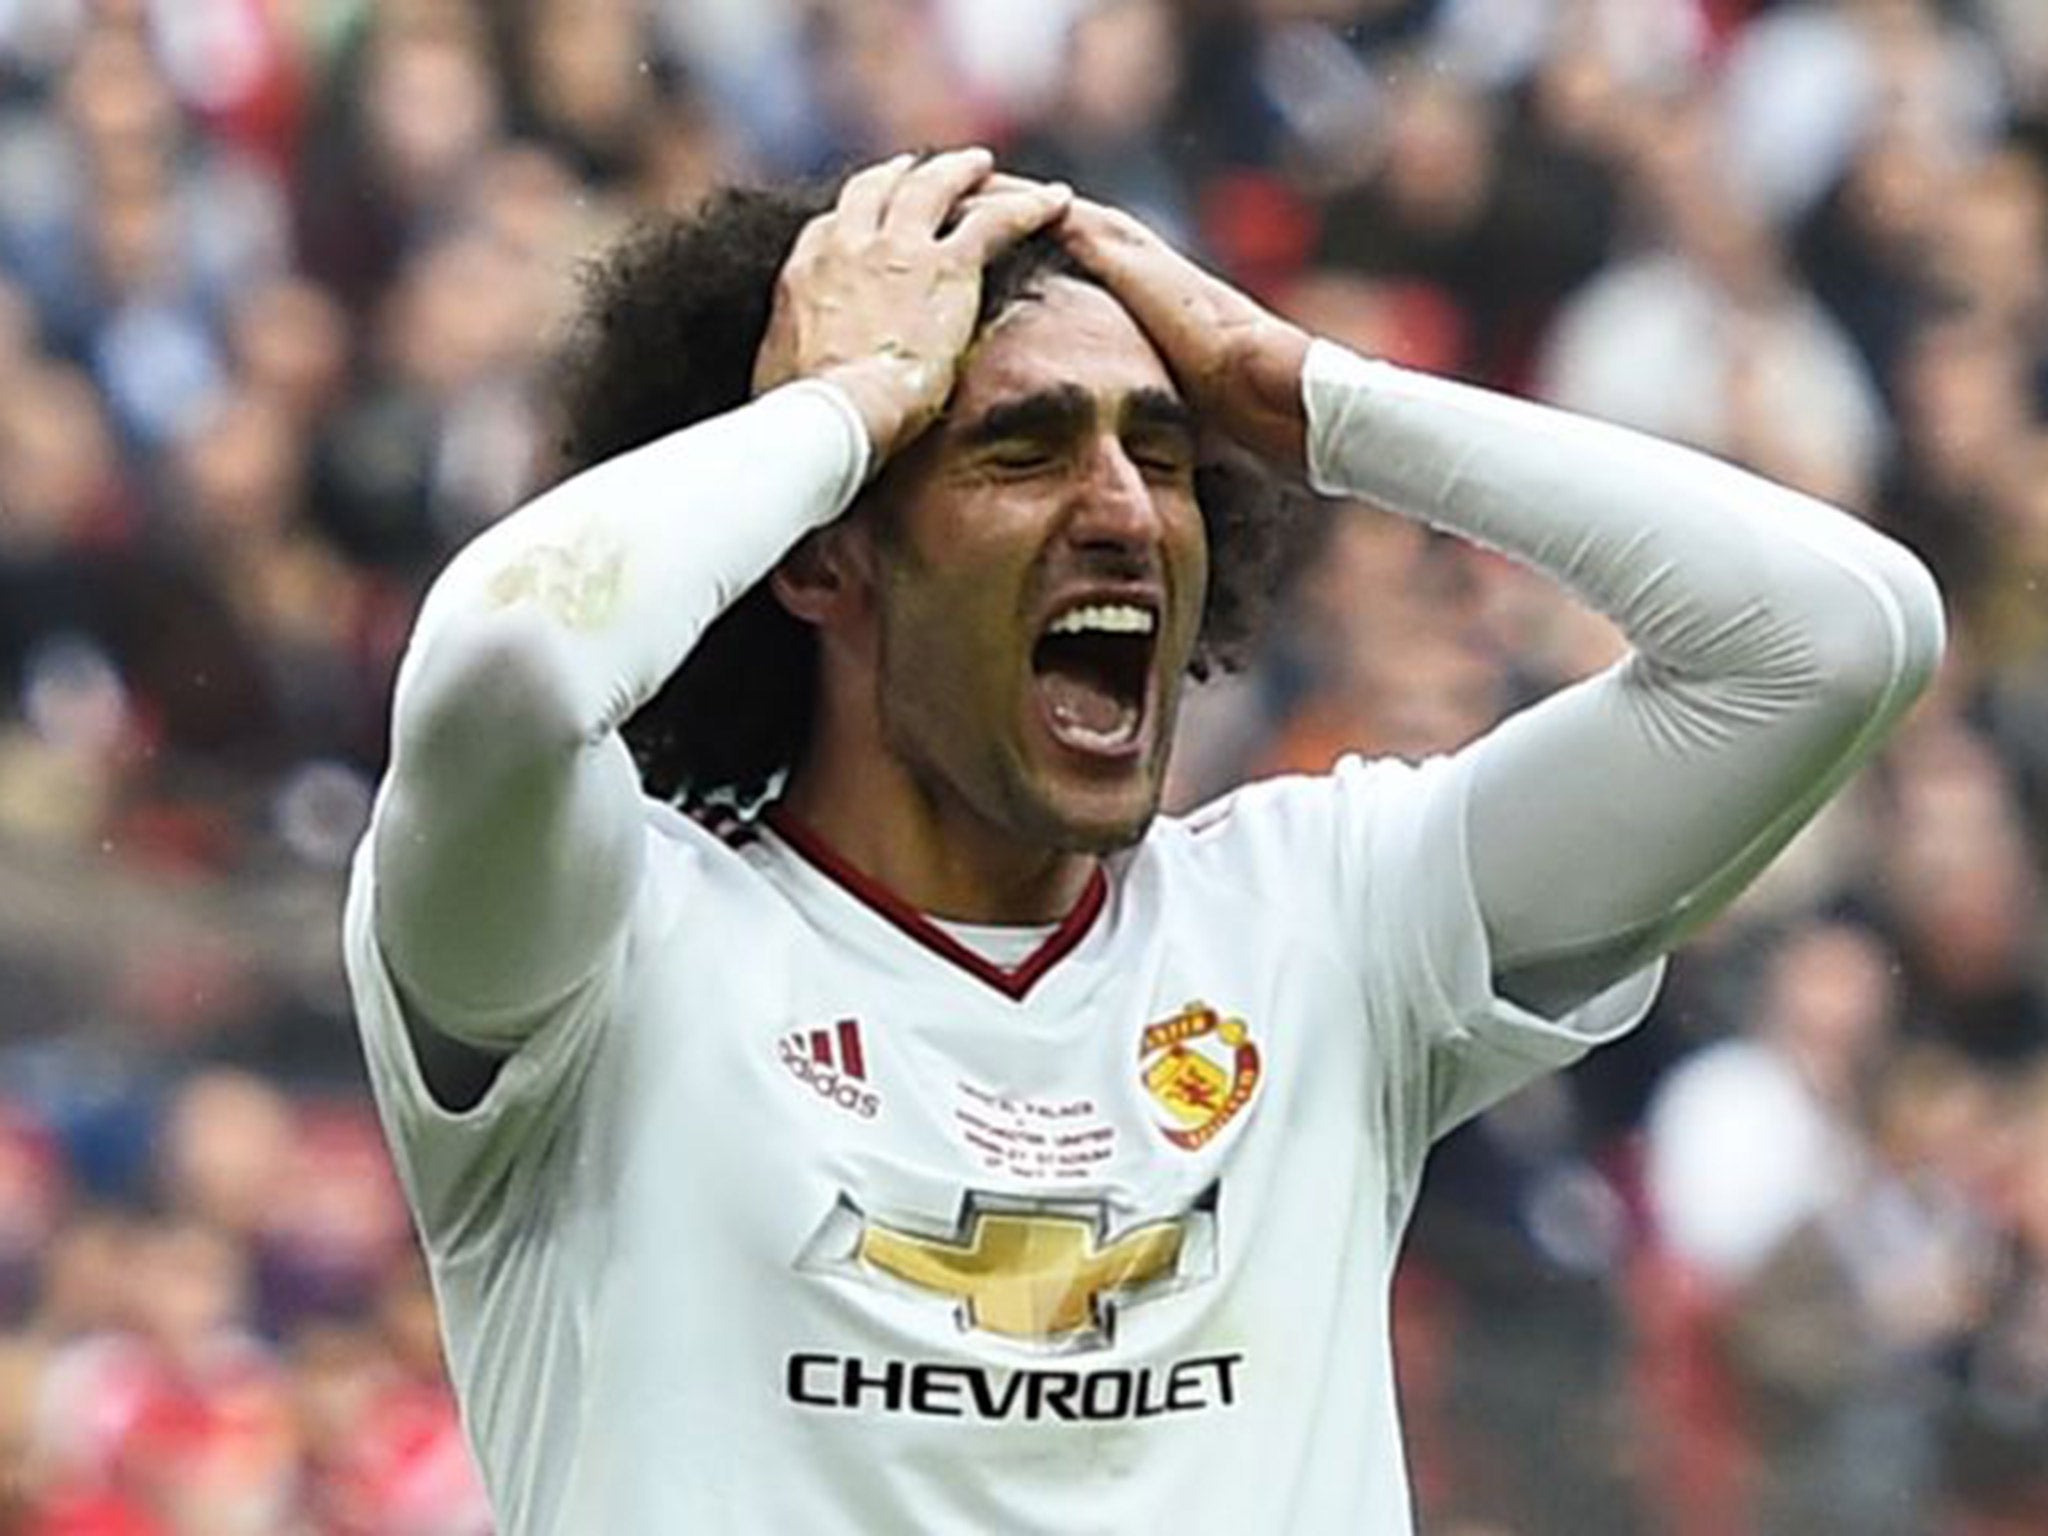 Marouane Felaini reacts to missing a chance at goal in the FA Cup final